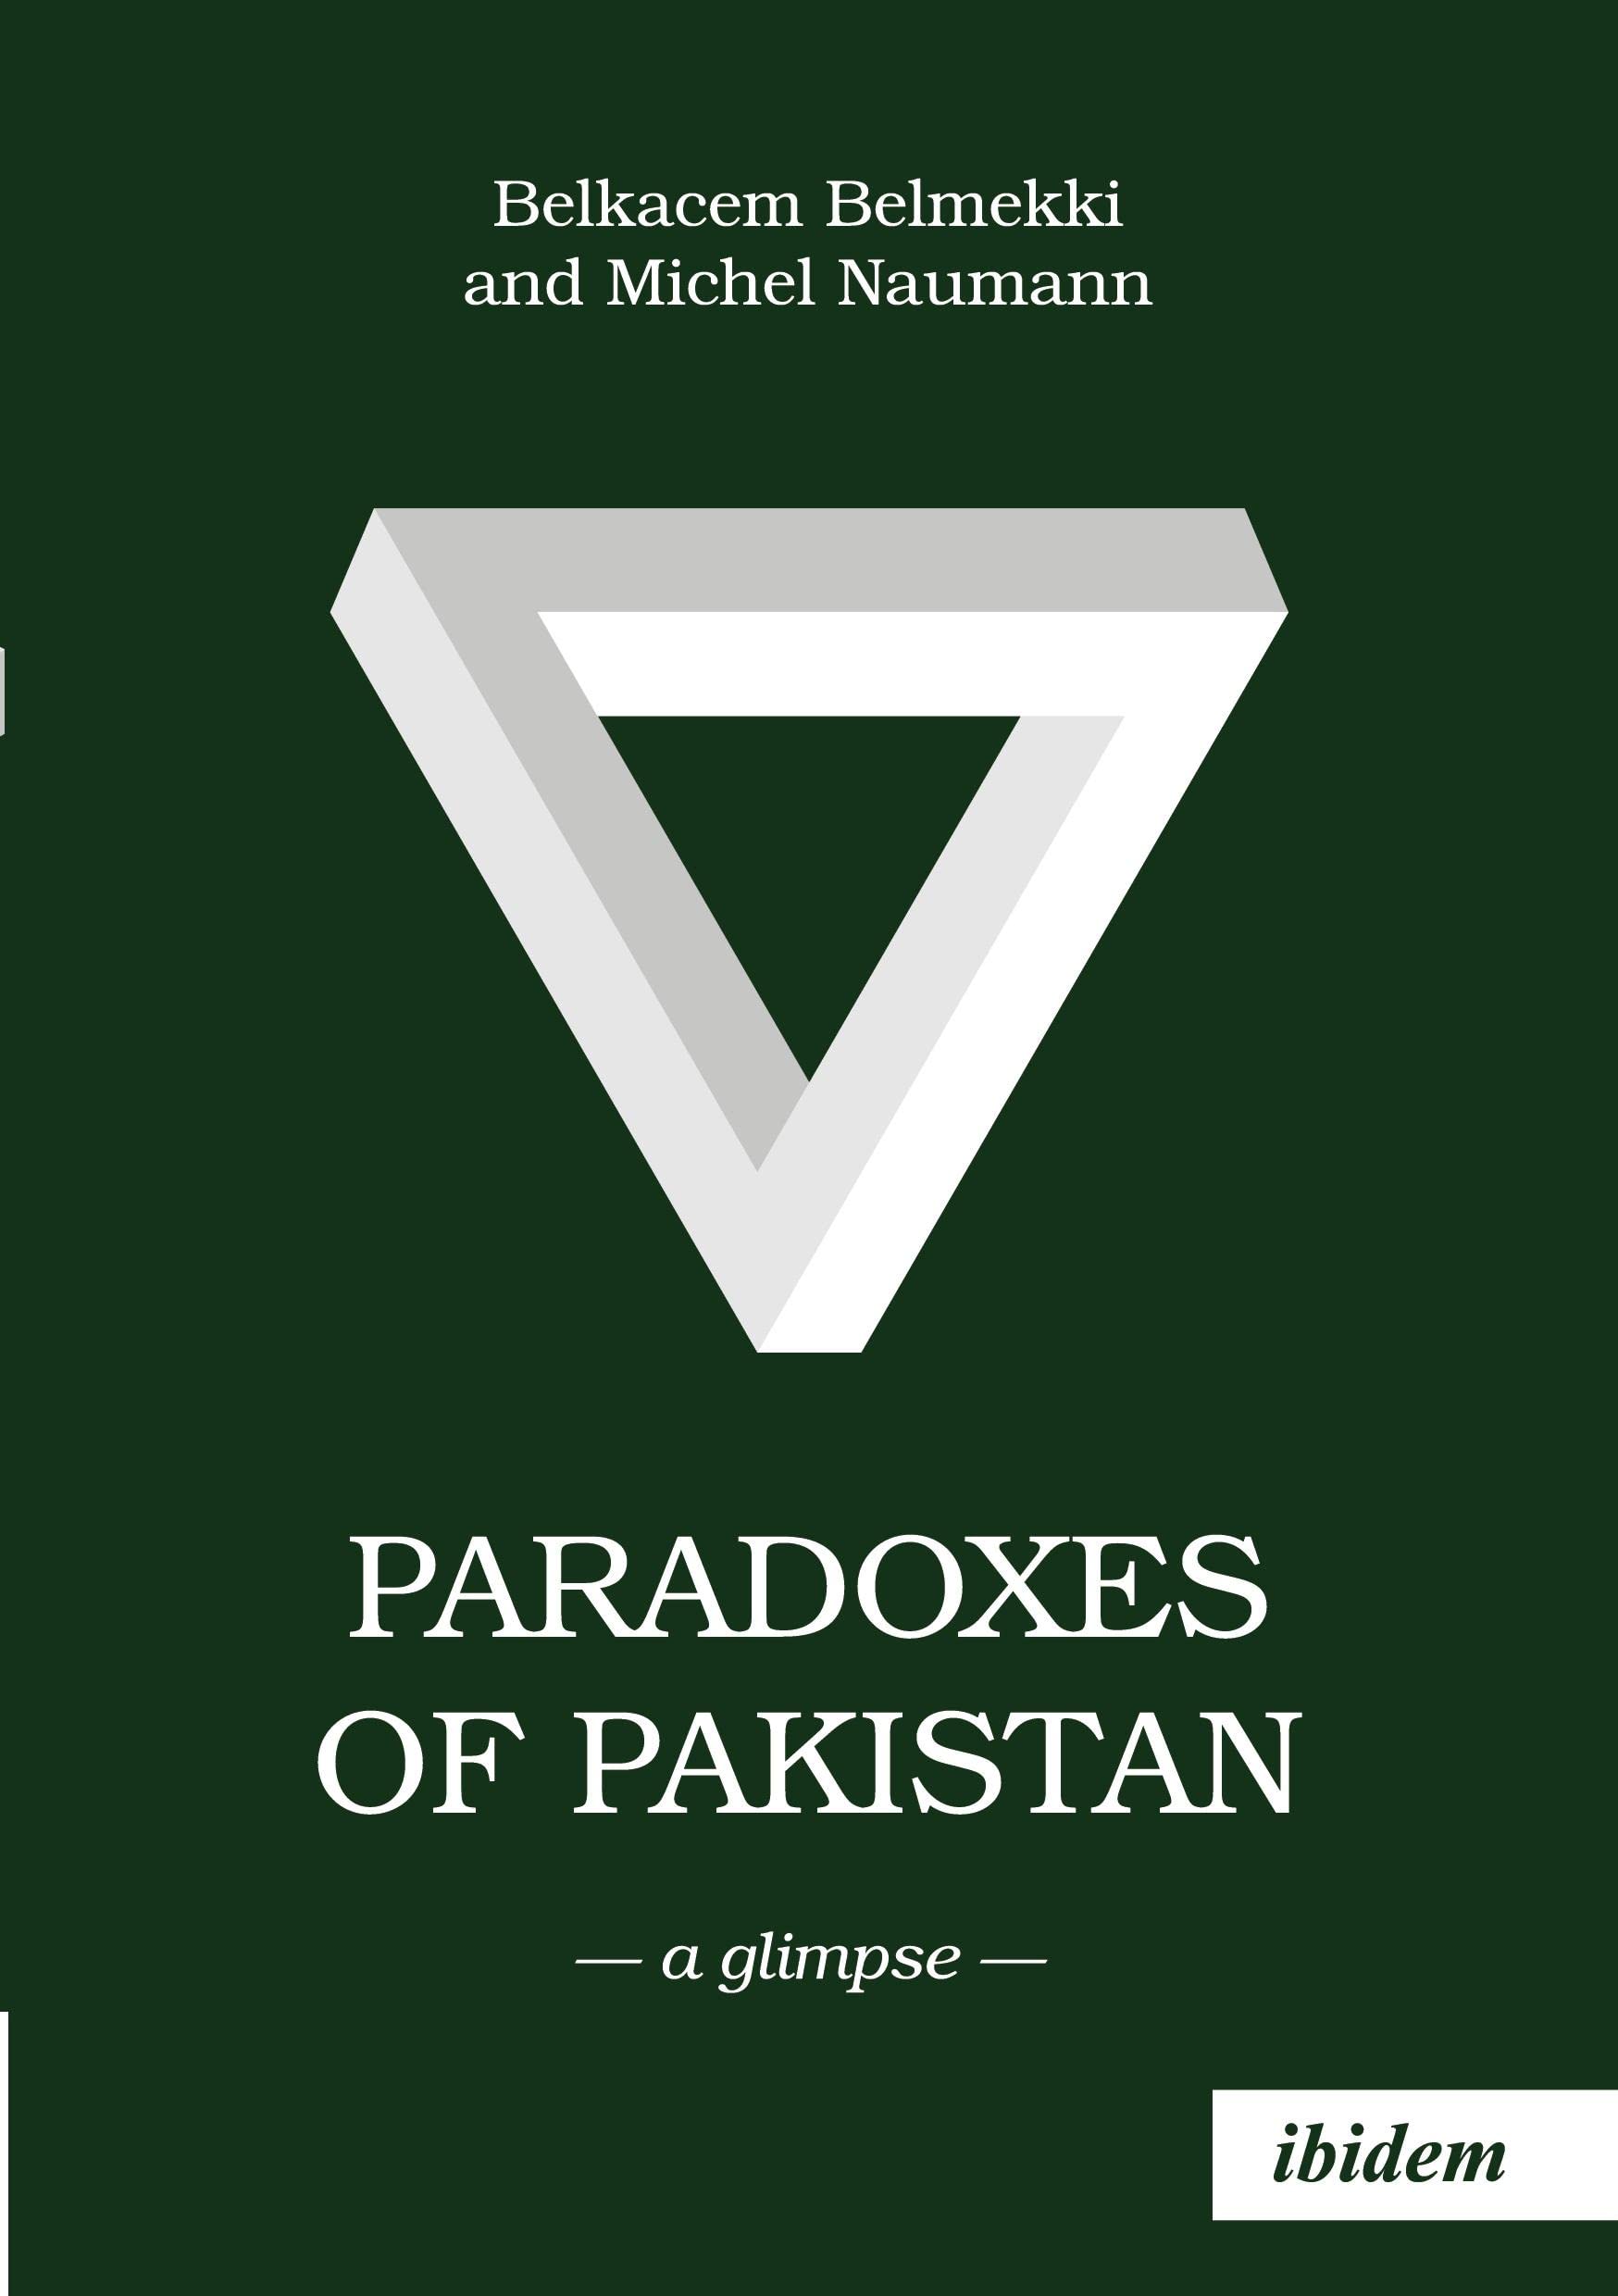 Paradoxes of Pakistan